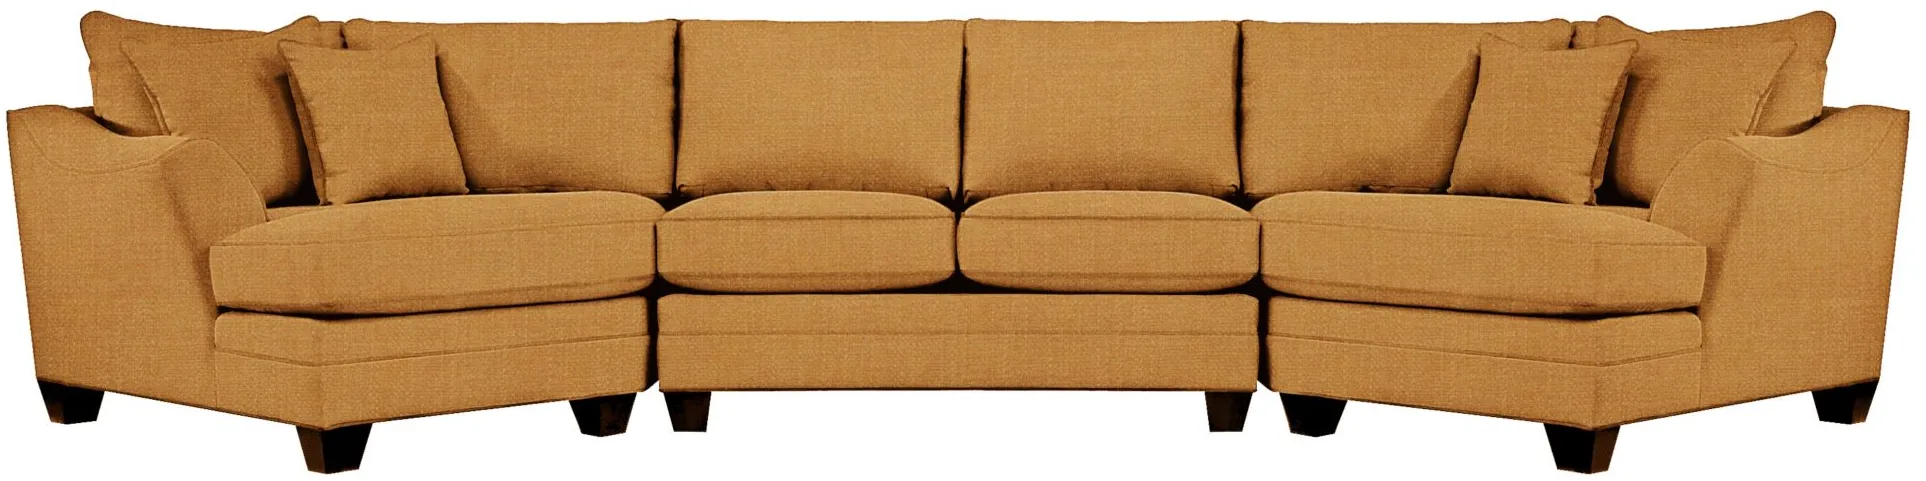 Foresthill 3-pc. Symmetrical Cuddler Sectional Sofa in Elliot Sunflower by H.M. Richards